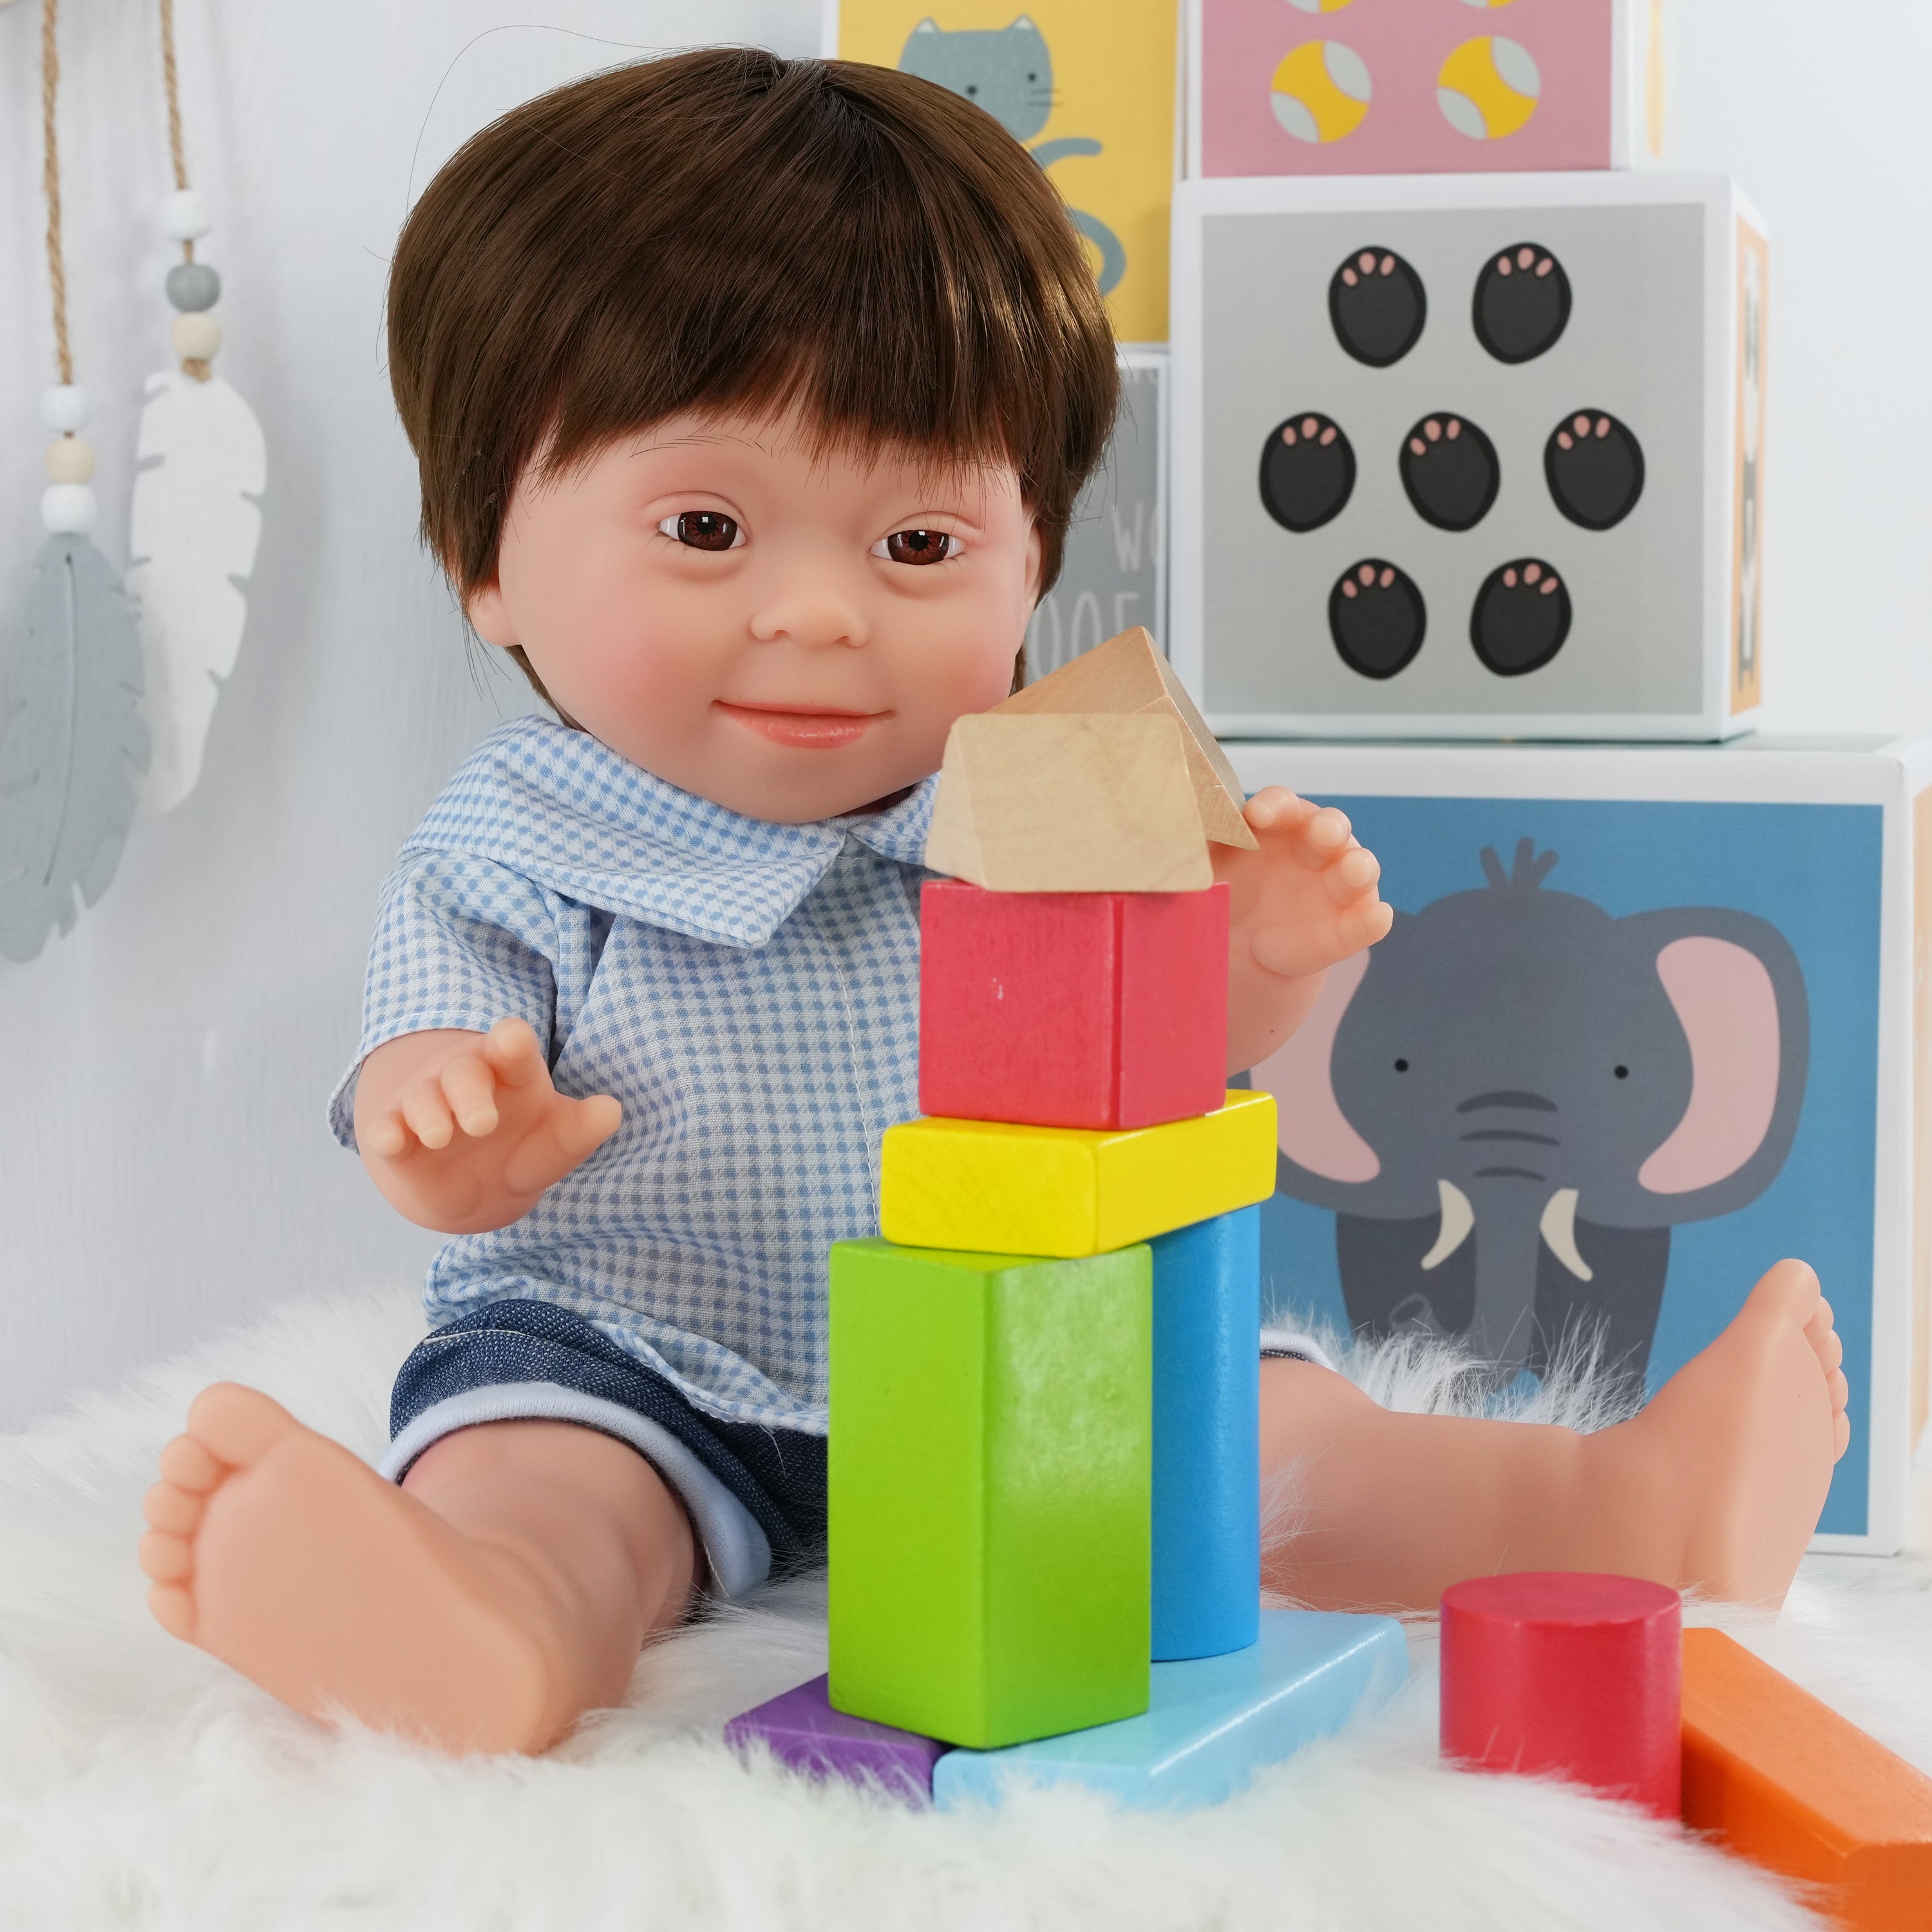 Baby Boy Dolls with Down Syndrome BiBi Doll - The Magic Toy Shop